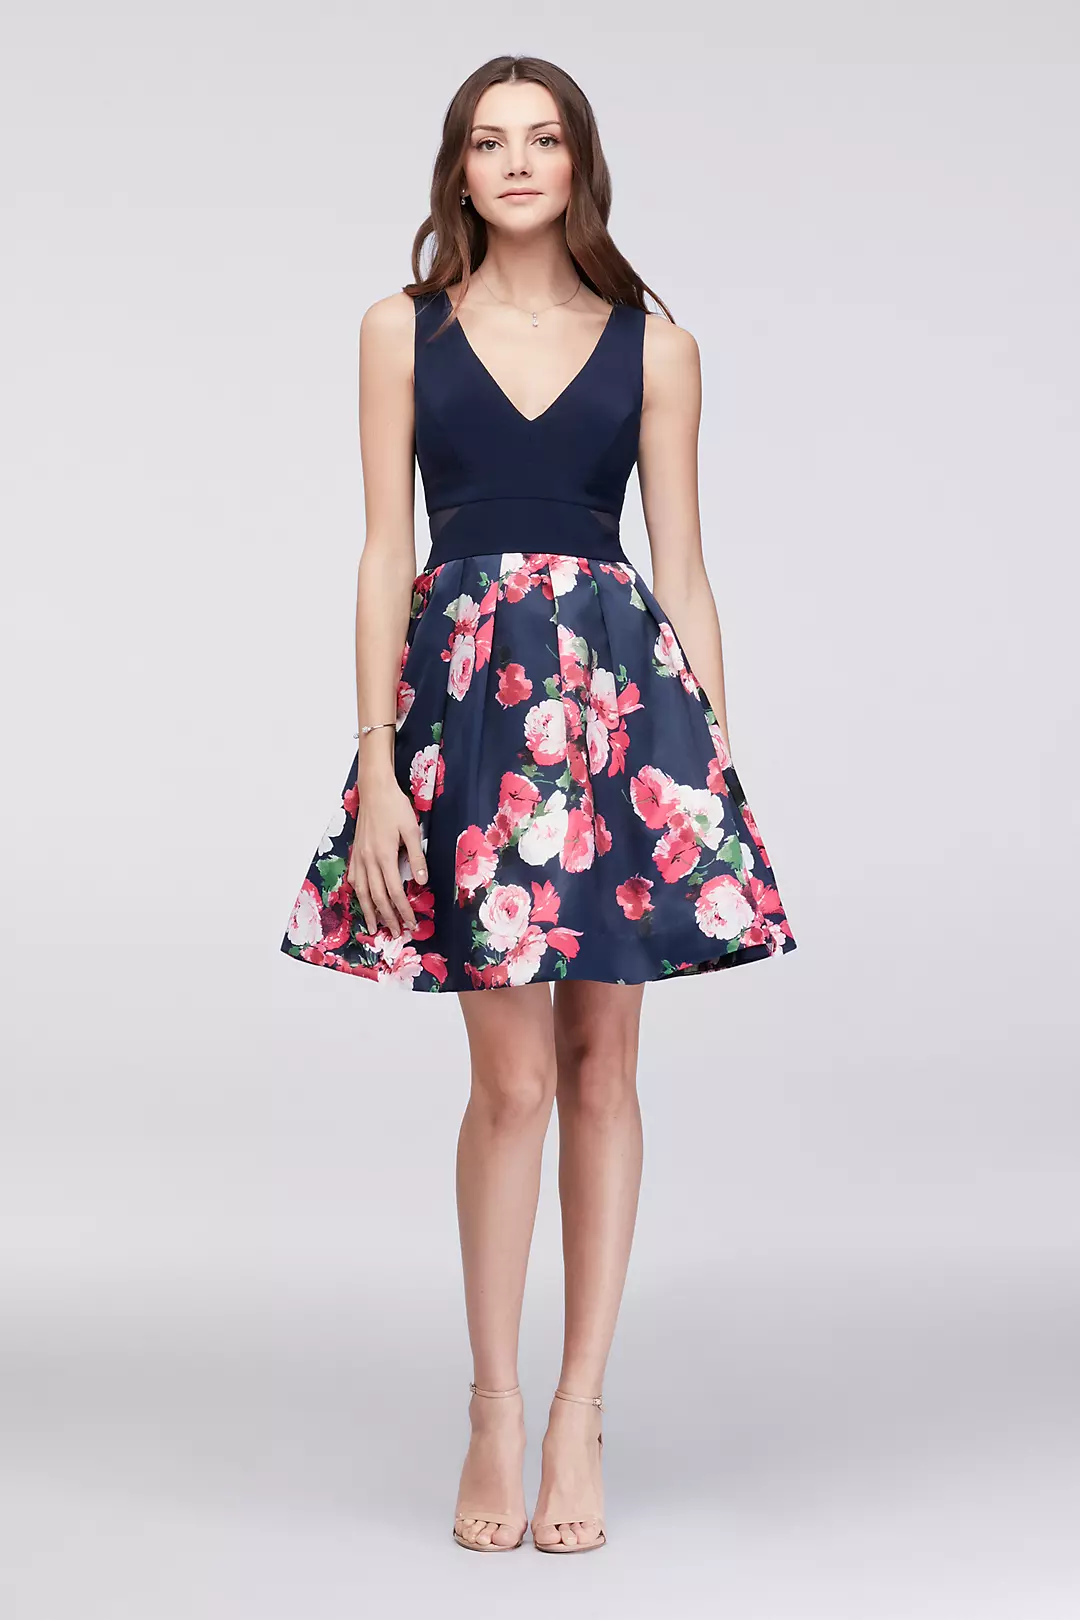 Floral Taffeta Cocktail Dress with Side Cutouts Image